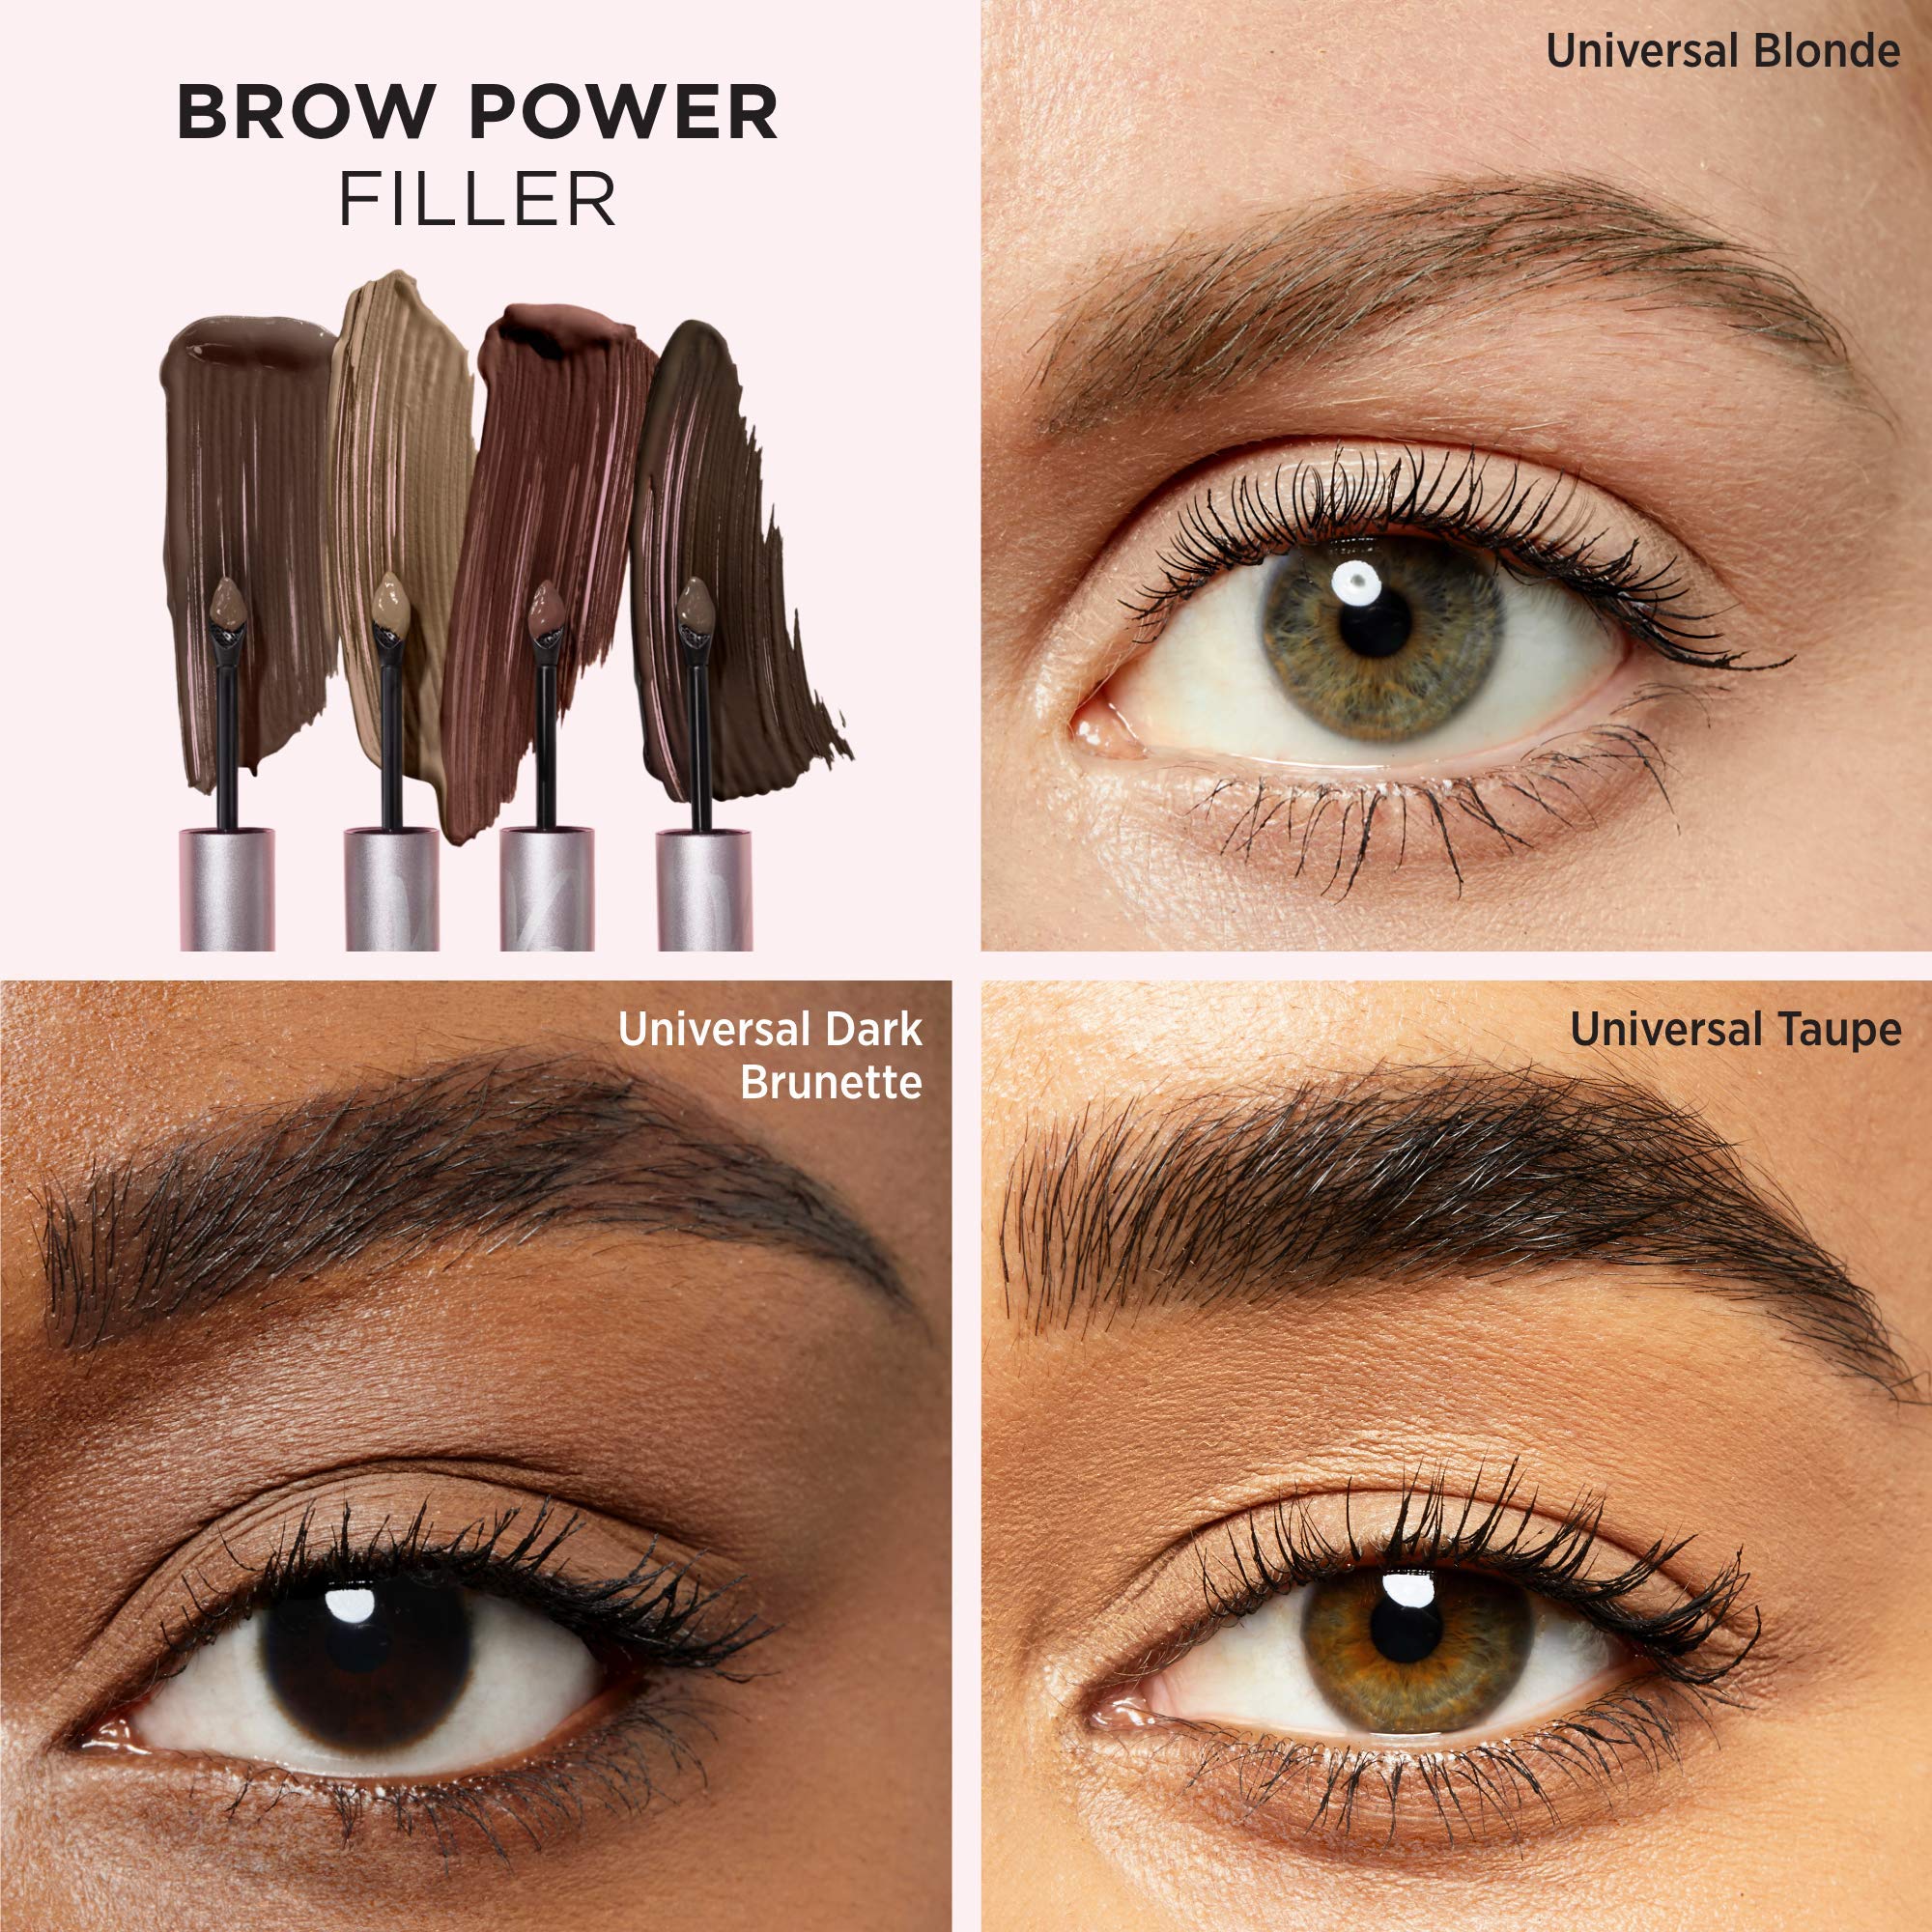 IT Cosmetics Brow Power Filler, Universal Taupe - Volumizing Tinted Fiber Brow Gel - Instantly Fills, Shapes & Sets Your Brows - Waterproof Formula Lasts Up To 16 Hours - 0.14 fl oz